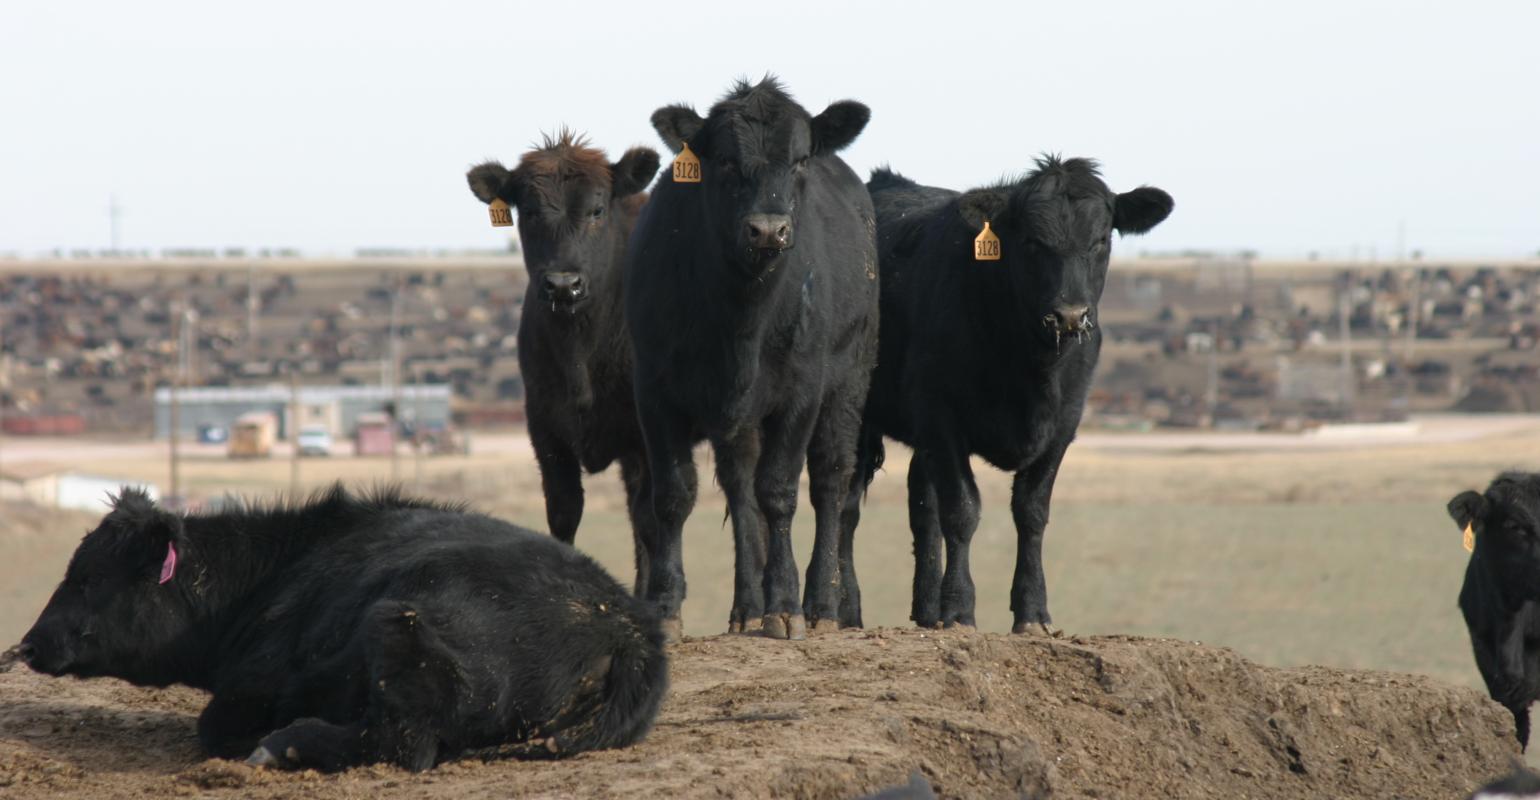 OSU's Derrell Peel Sees Tighter Cattle Numbers Translating Into Falling Beef Production